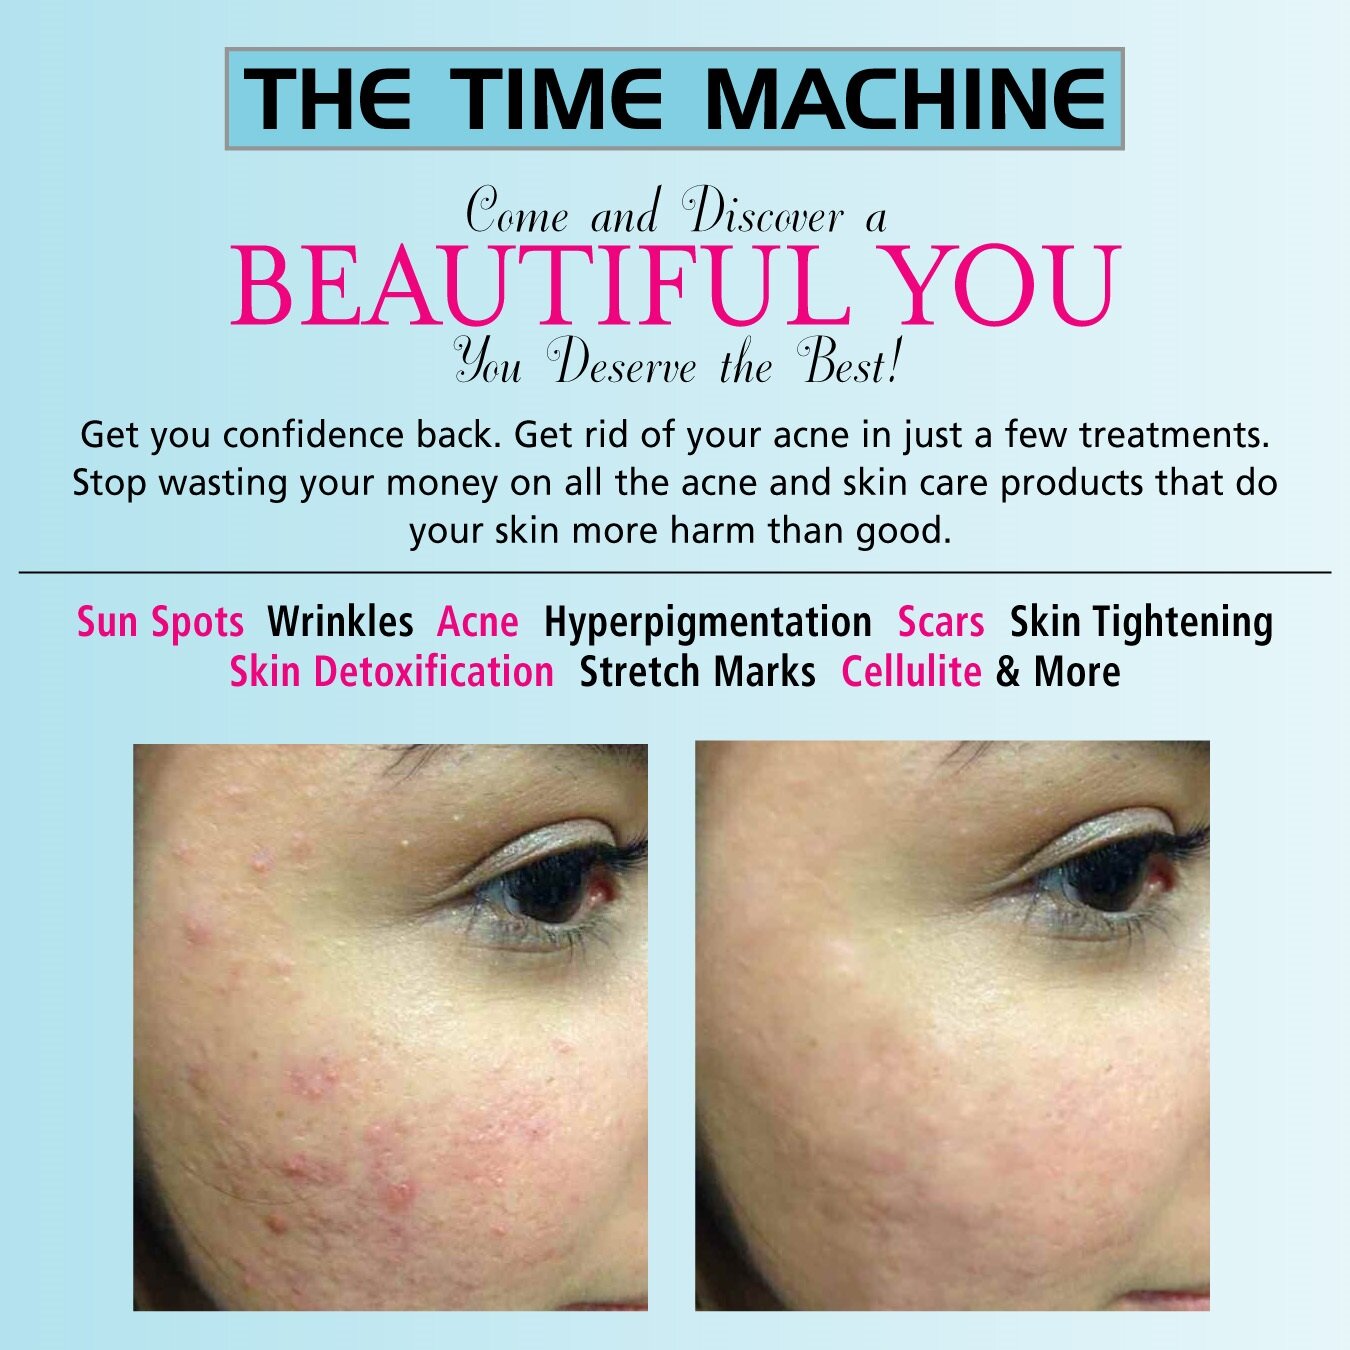 http://t.co/ICBkWNWD7u The Time Machine Program was designed to strip years of the aging of the way you look.